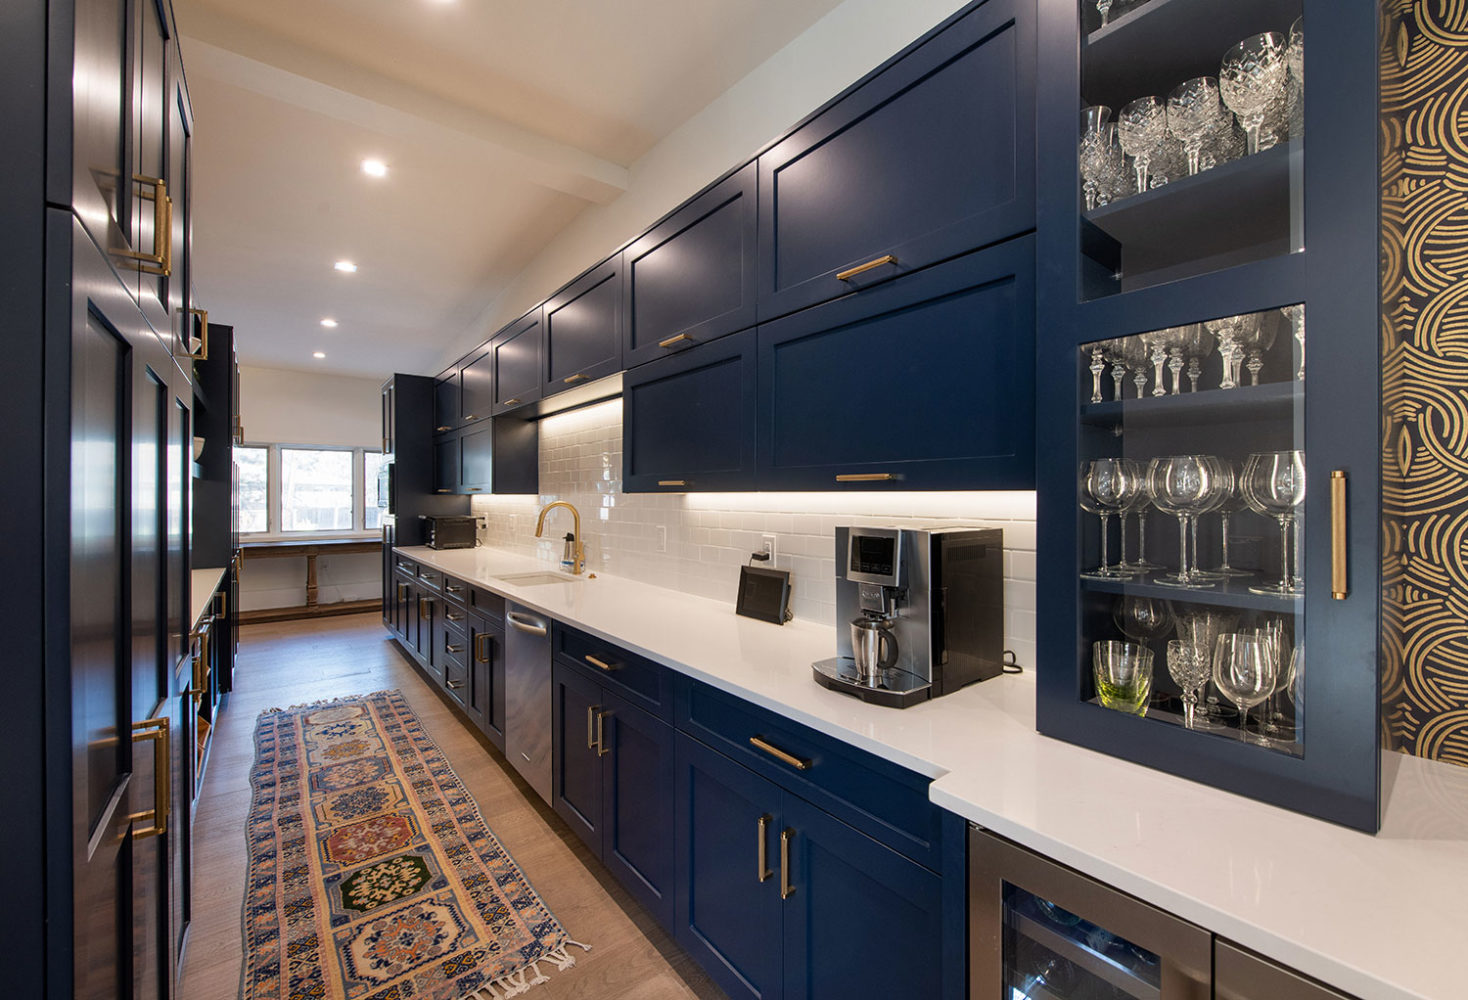 12 Kitchen Remodeling Trends to Look for in 2023